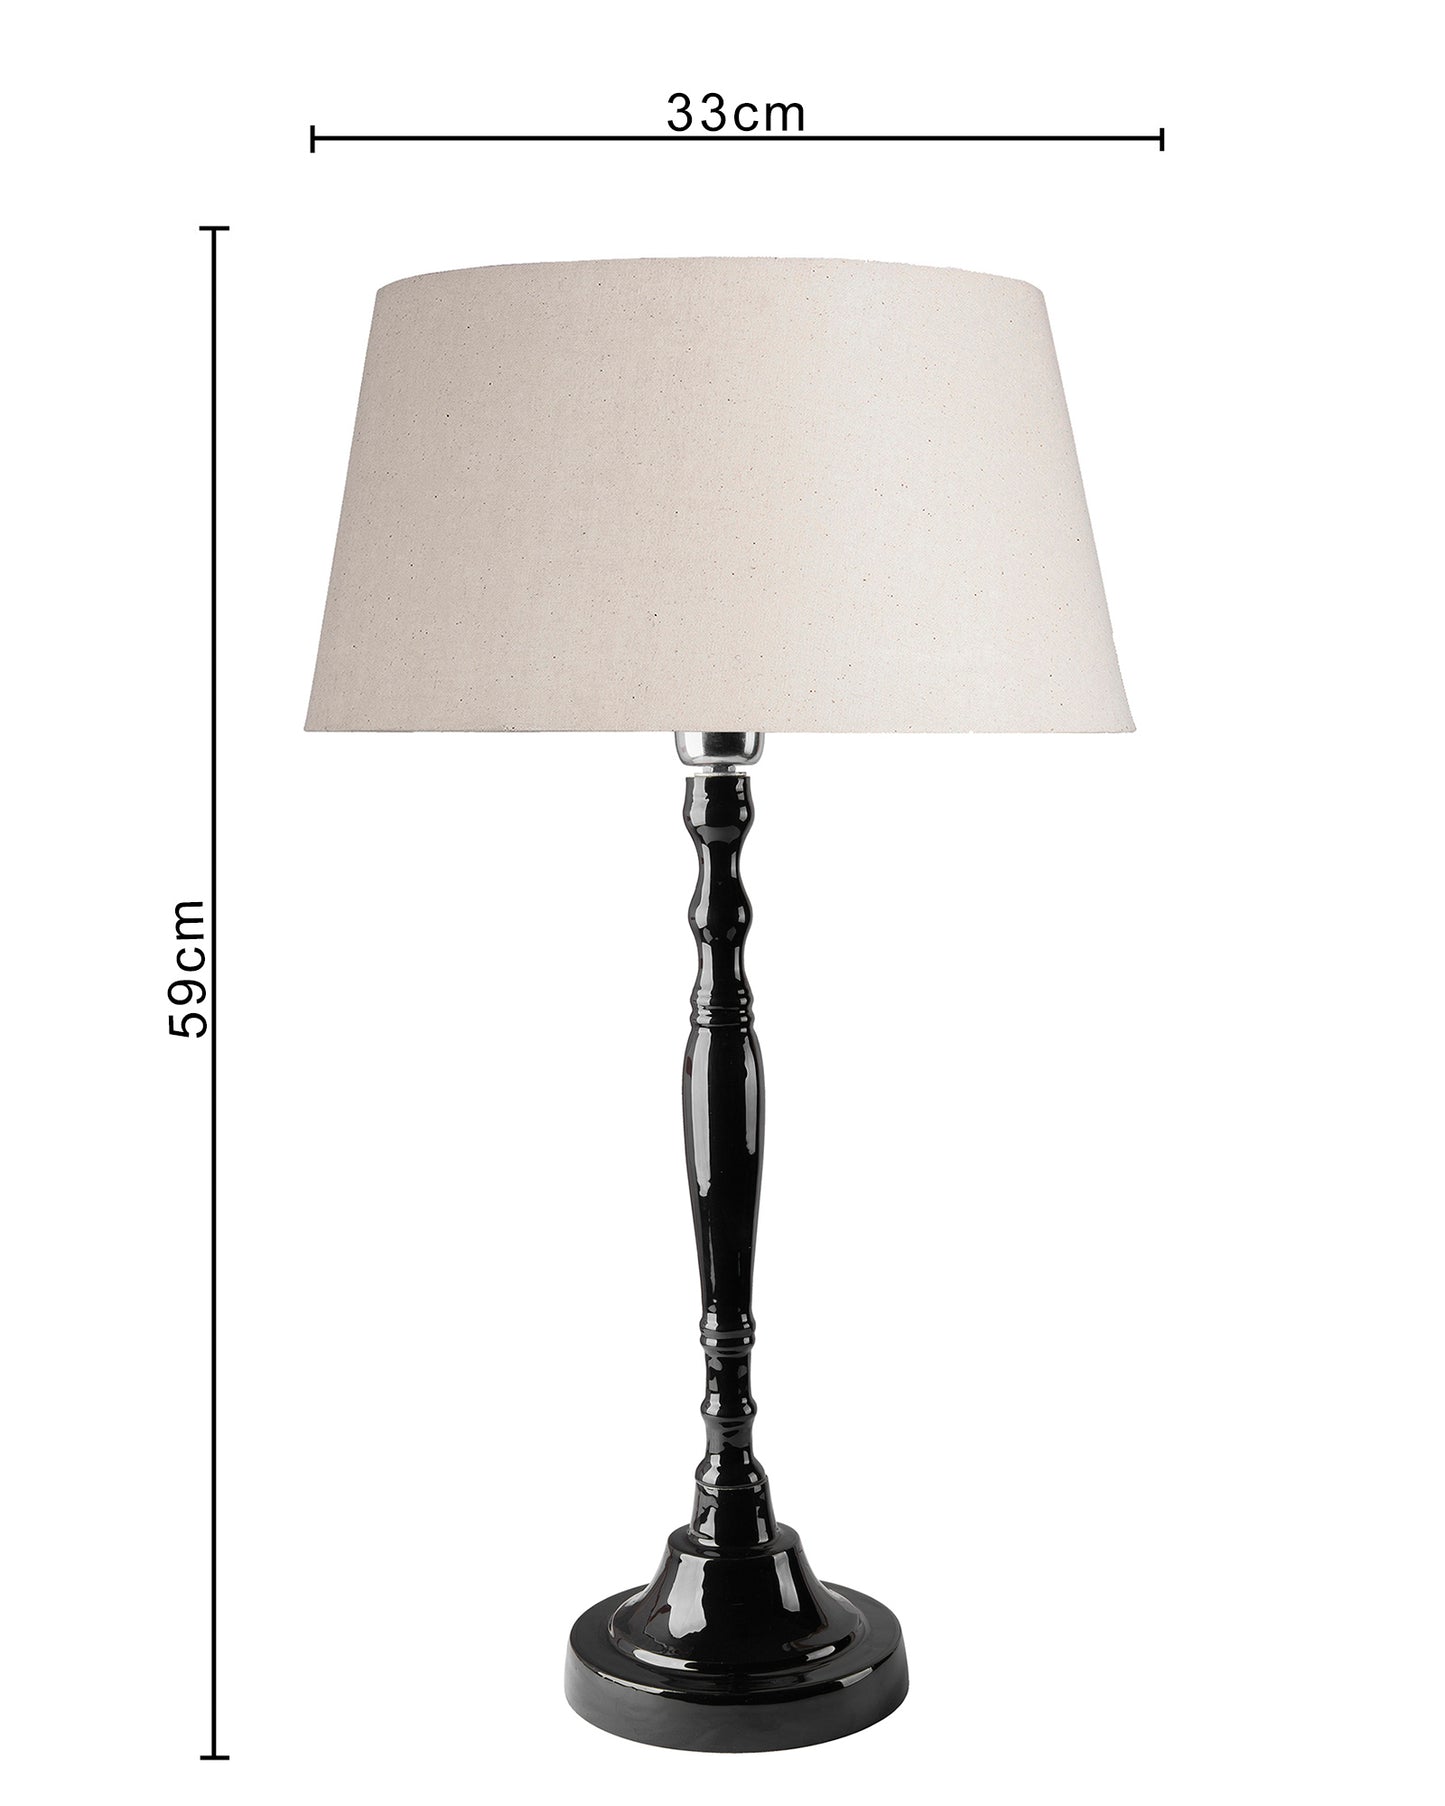 Glossy Black Imperial Aluminium Table Lamp With Cone Shade, Bedside, Living Room Study Lamp, Bulb Included